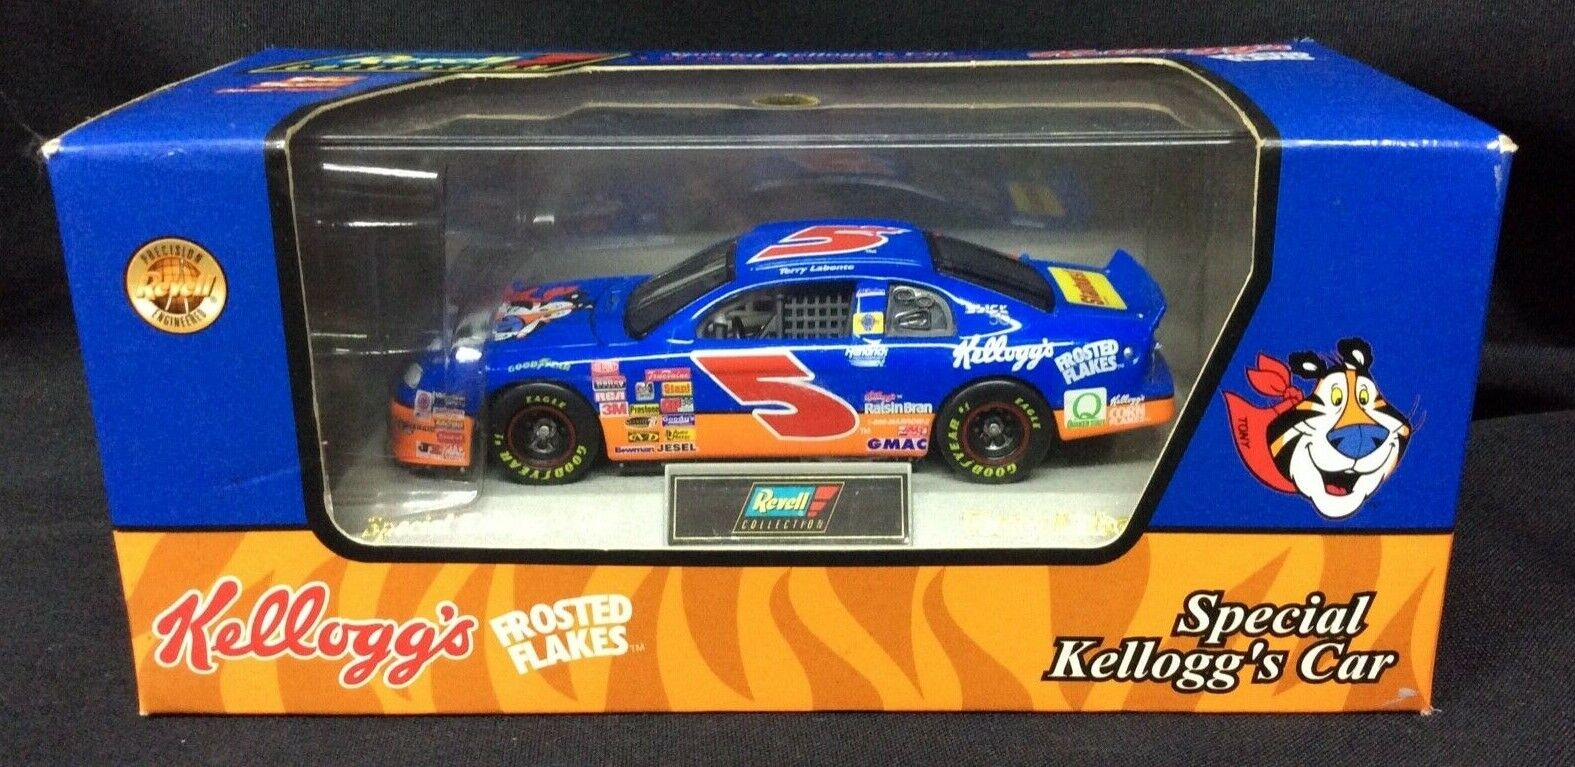 Details about   New 1997 Hot Wheels NASCAR 1:64 Diecast Terry Labonte Kellogg's Tony the Tiger b 